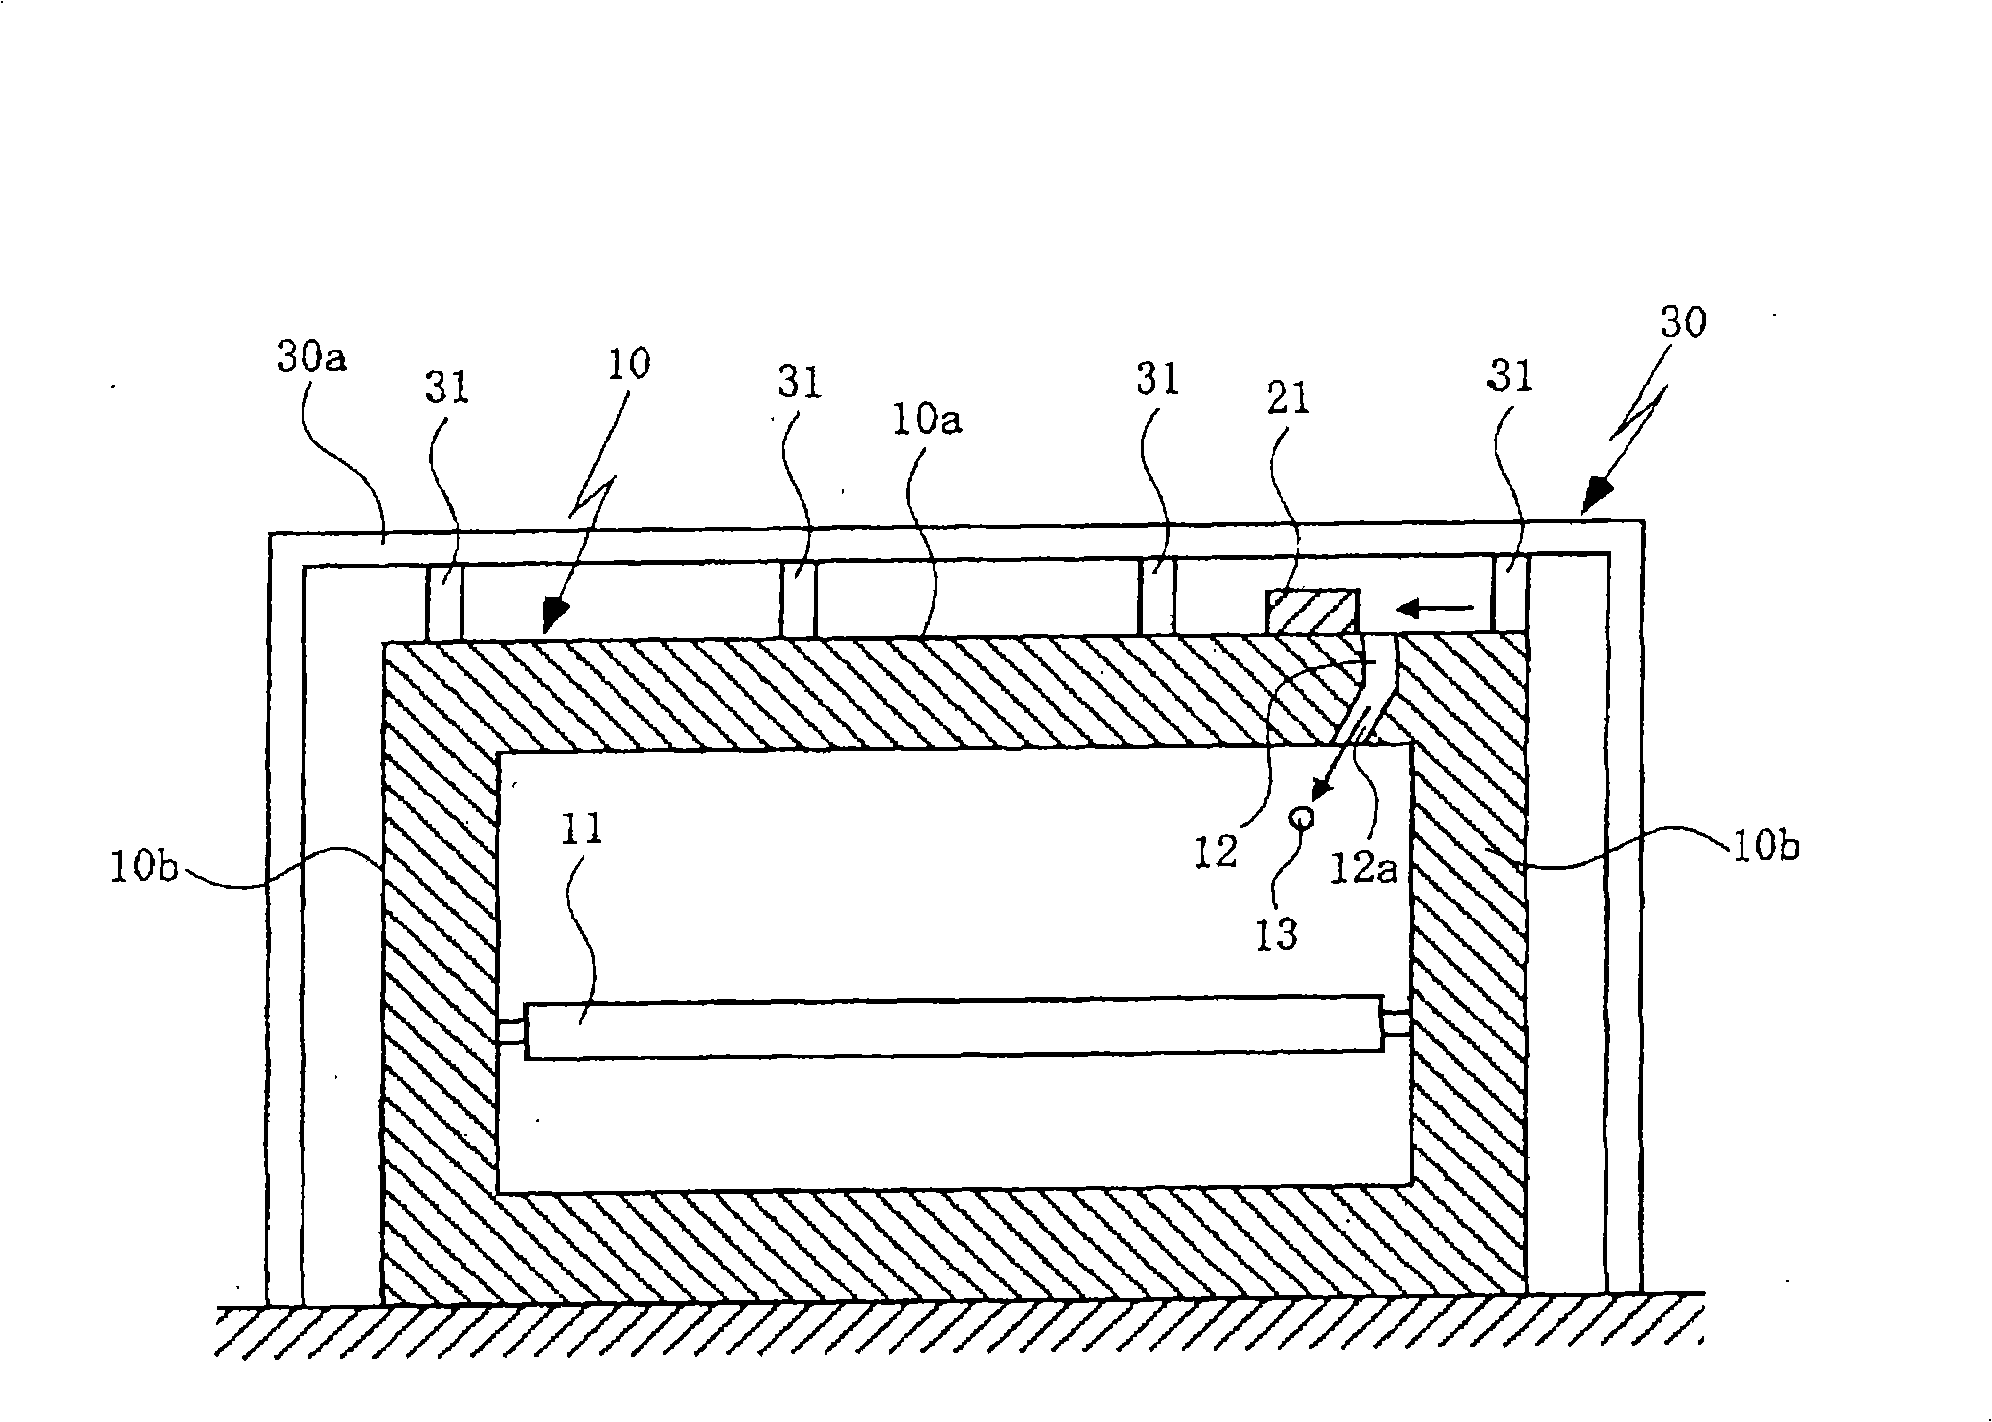 Continuous annealing device